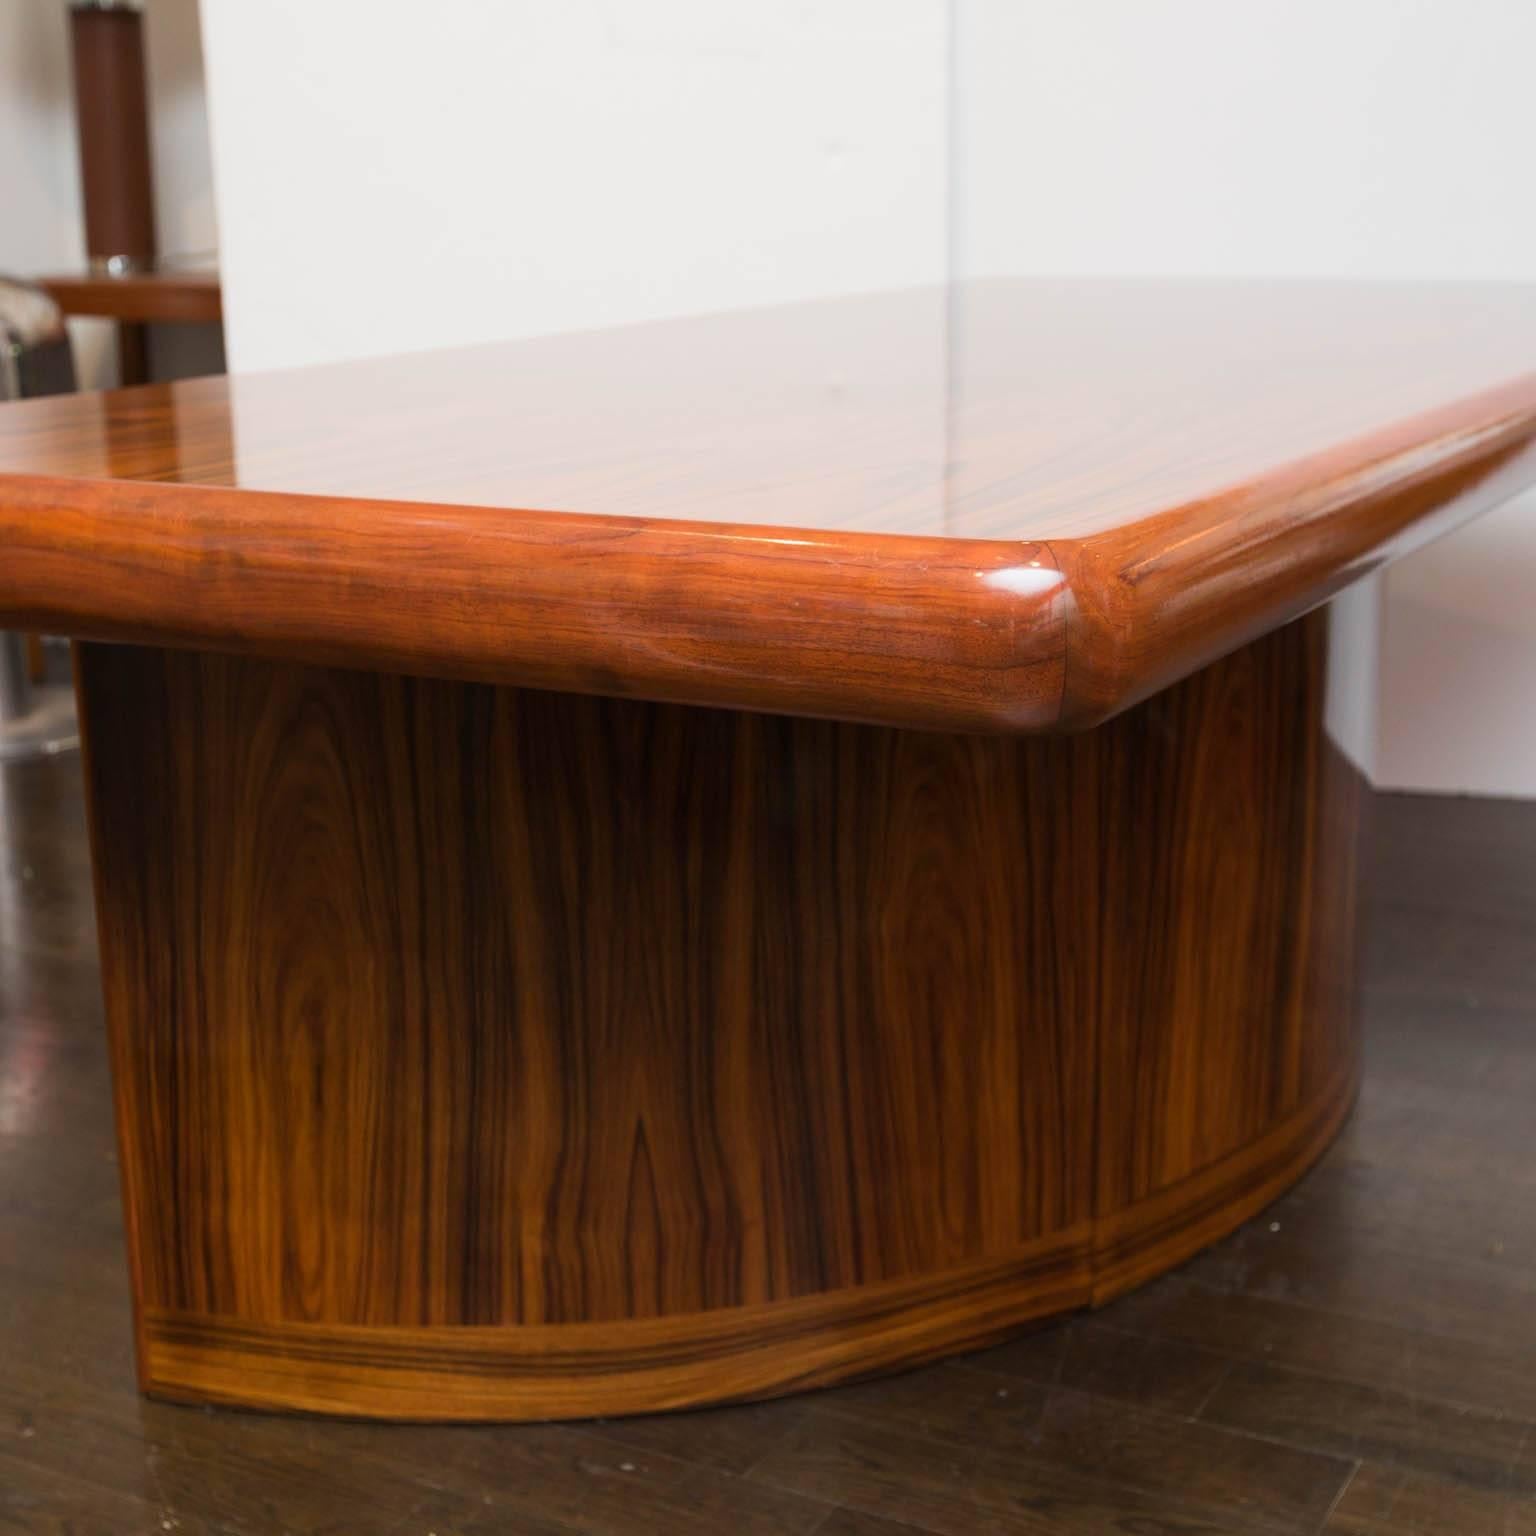 This Danish modern desk will make a dramatic statement in any office. Room for multiple computer monitors with which to keep tabs on the Empire. A writing shelf is flanker right and left with beautiful rosewood finished drawers. This was the top of